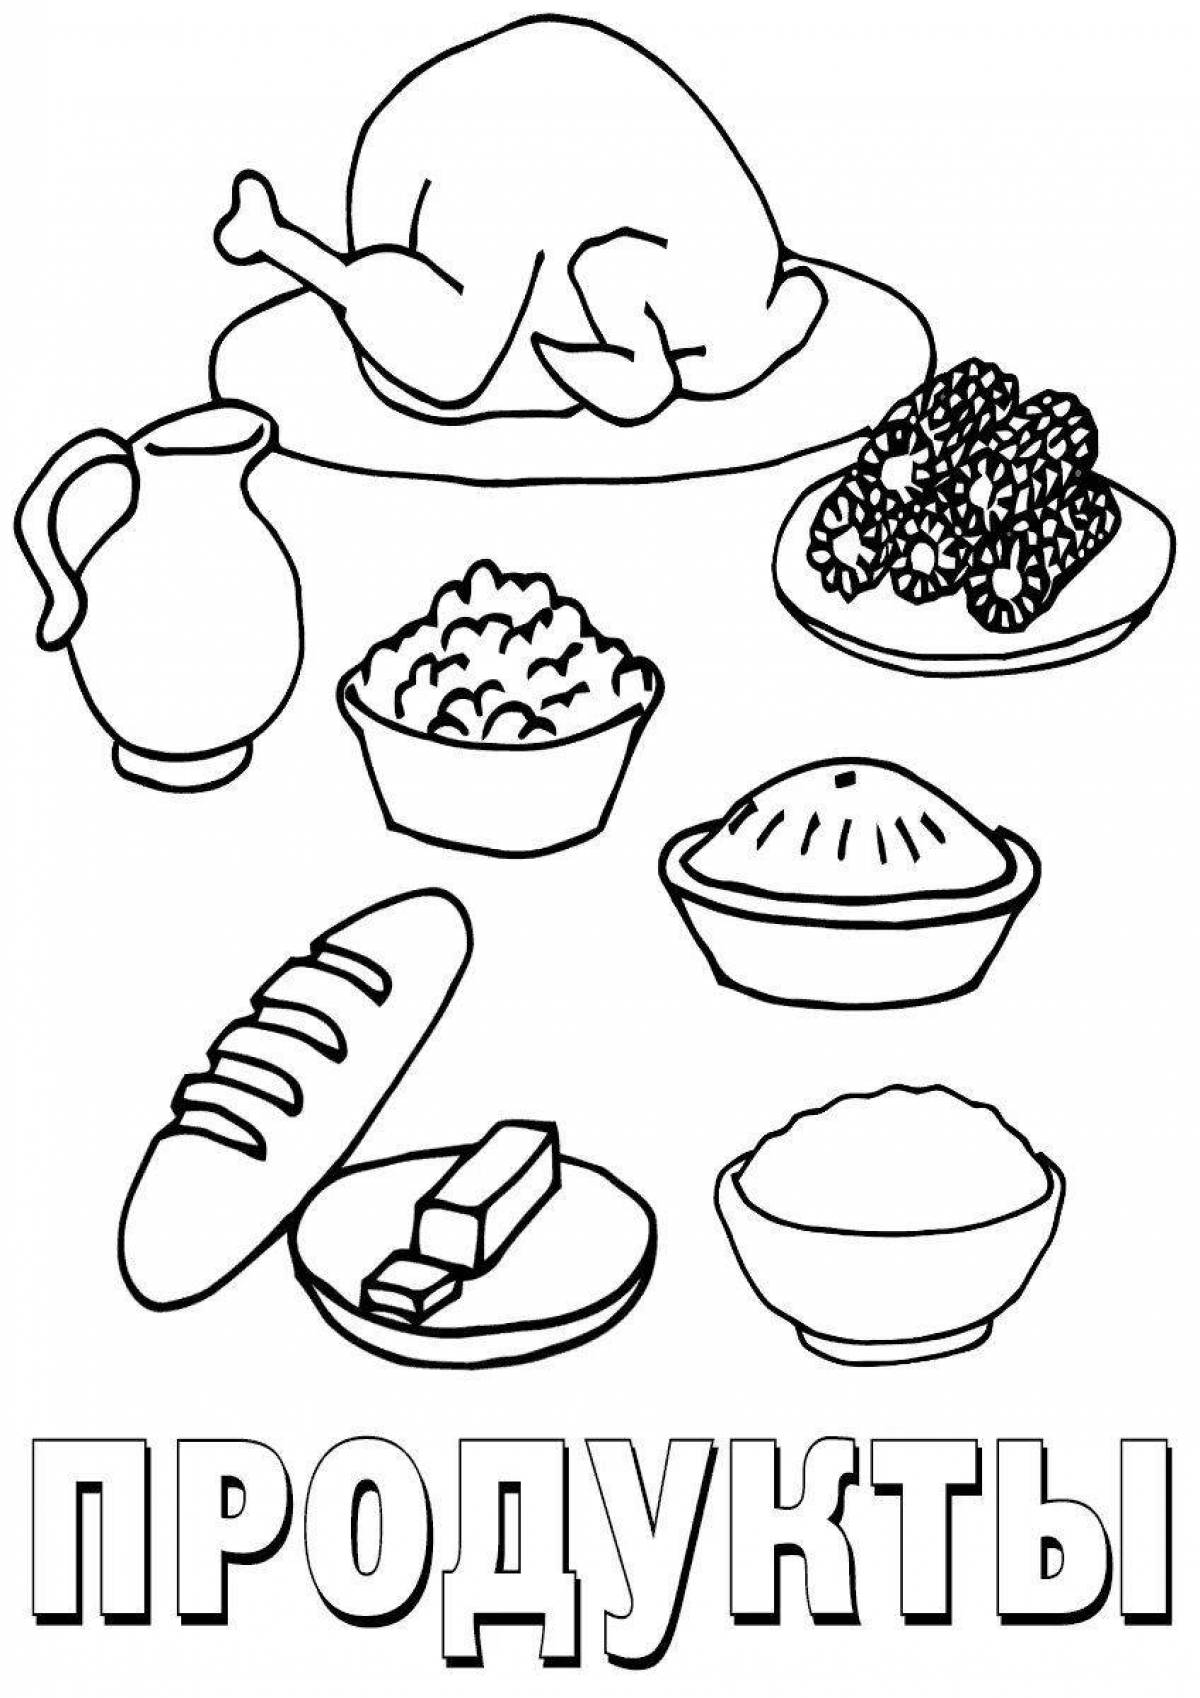 Sweet healthy food coloring book for 4-5 year olds